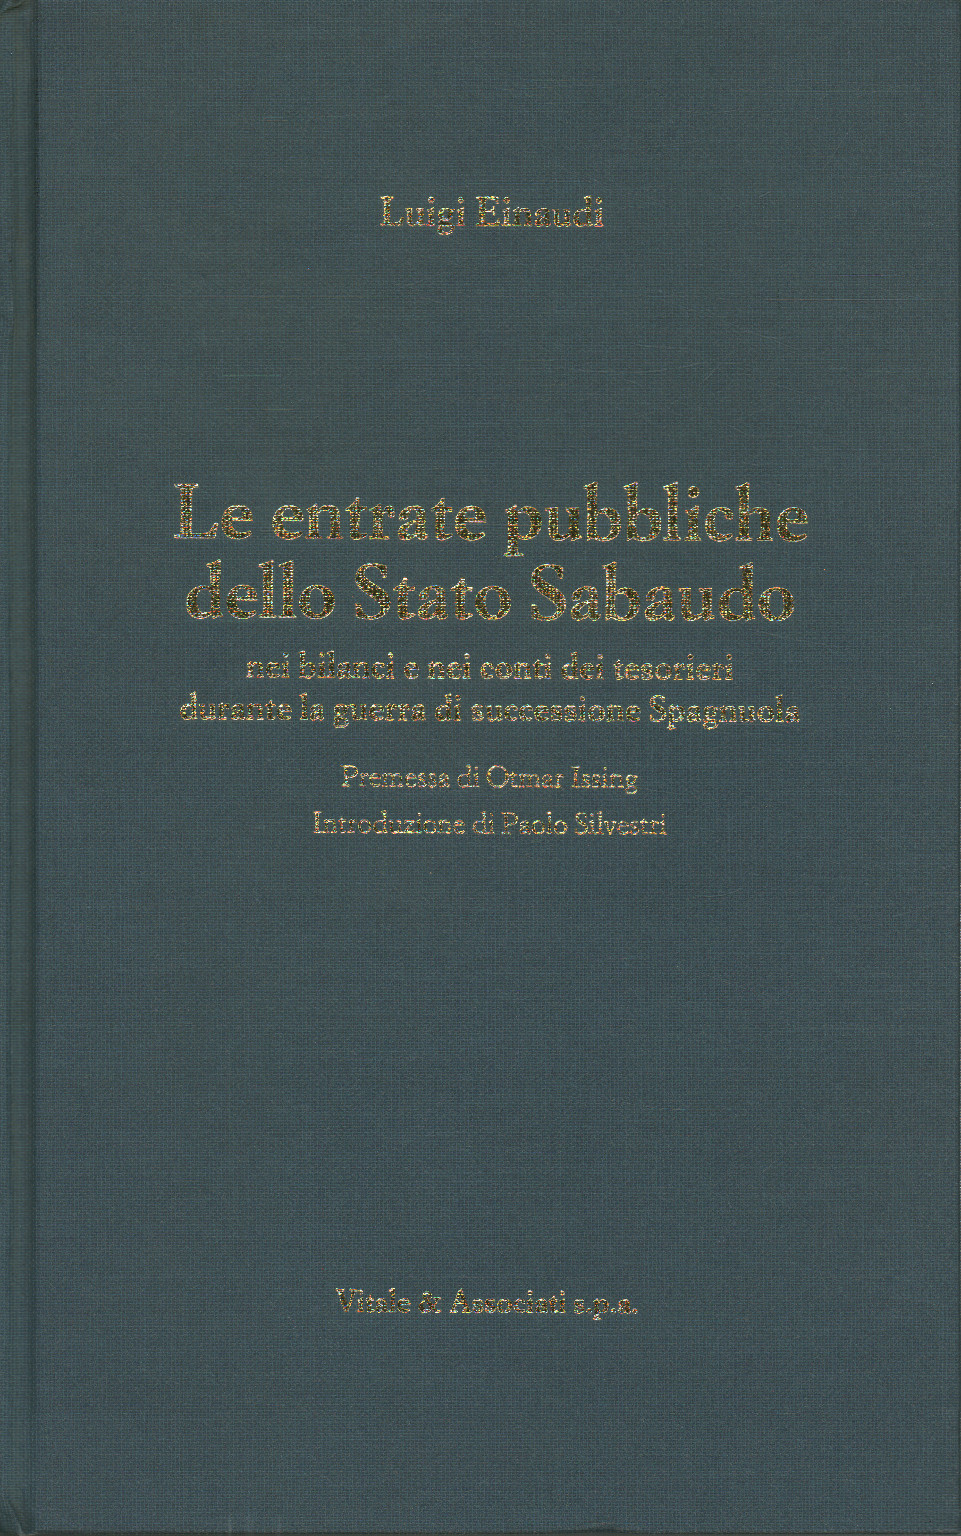 The public revenue of the Savoy State in the bilan, s.a.